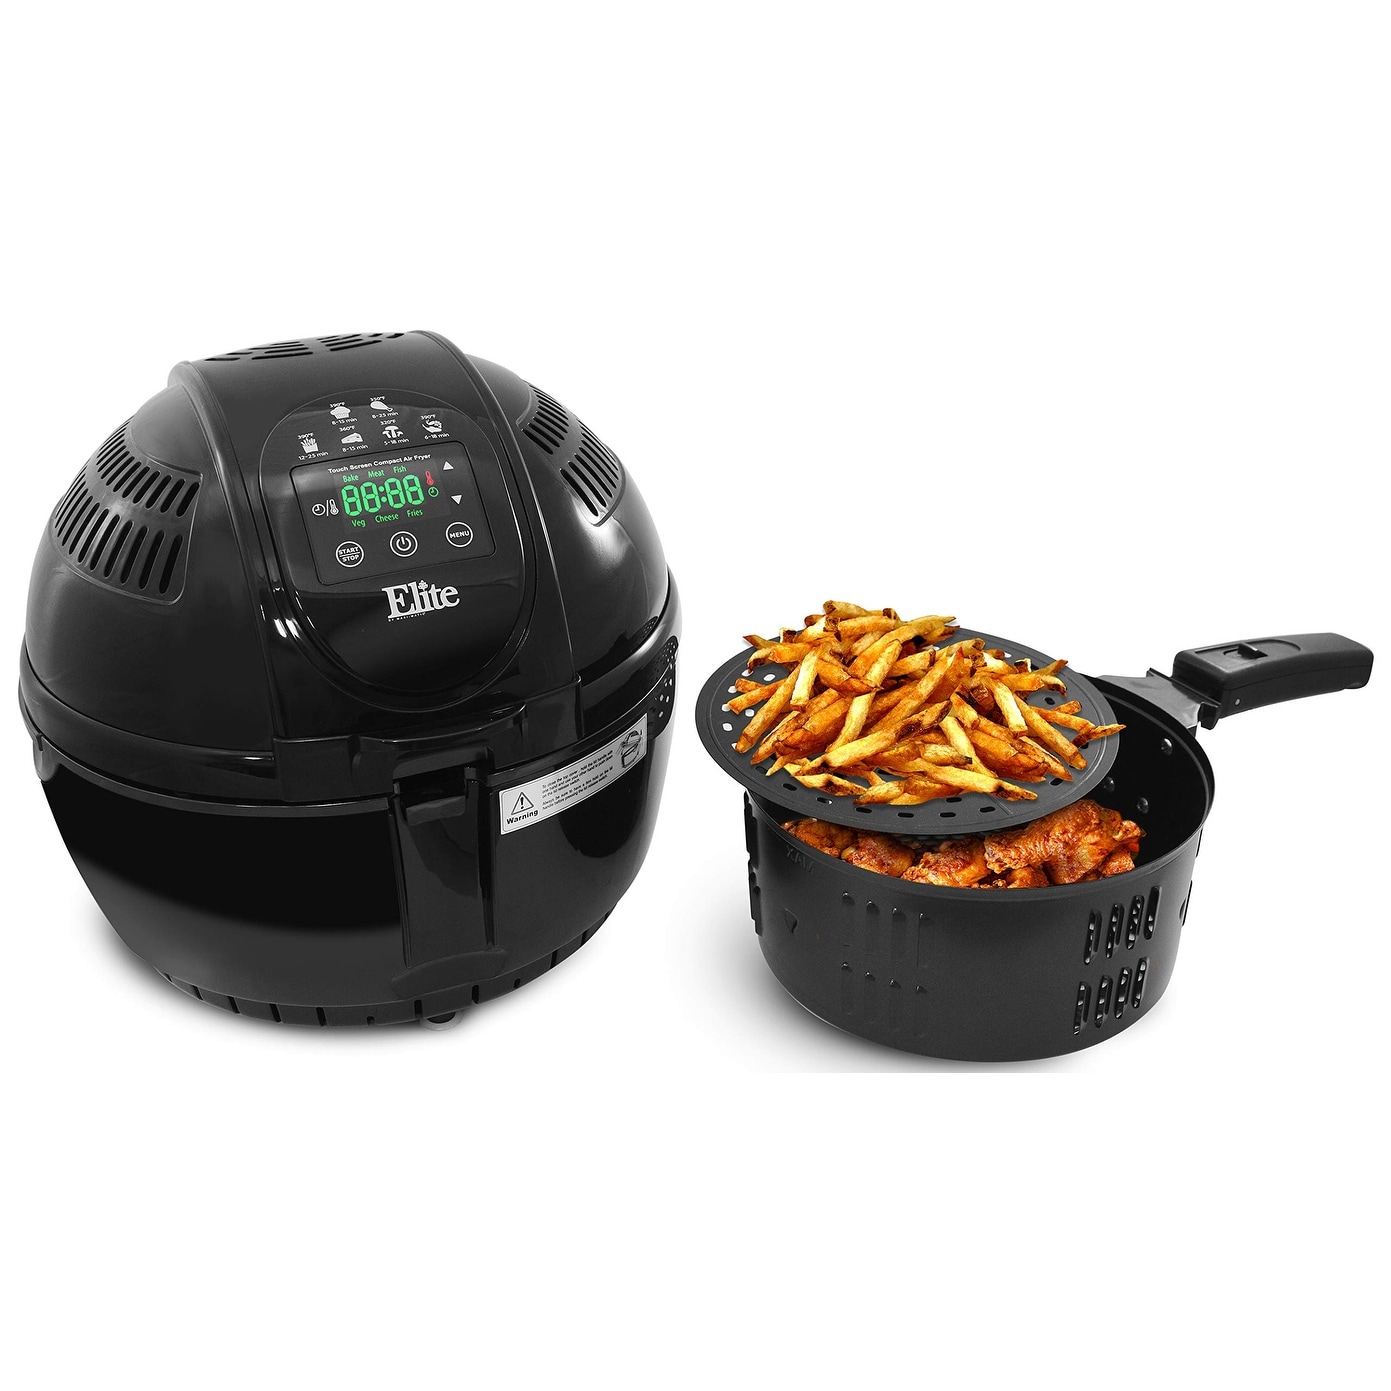 https://ak1.ostkcdn.com/images/products/is/images/direct/5b7289f84e8a79abfa2fdc304a46ce0a11e26cb1/Dual-Basket-3.5Qt-Electric-Digital-Hot-Air-Fryer%2C-1400W%2C-Oil-Less-Healthy-Cooker%2C-Temp-Timer-Settings%2C-26-Full-Color-Recipes.jpg